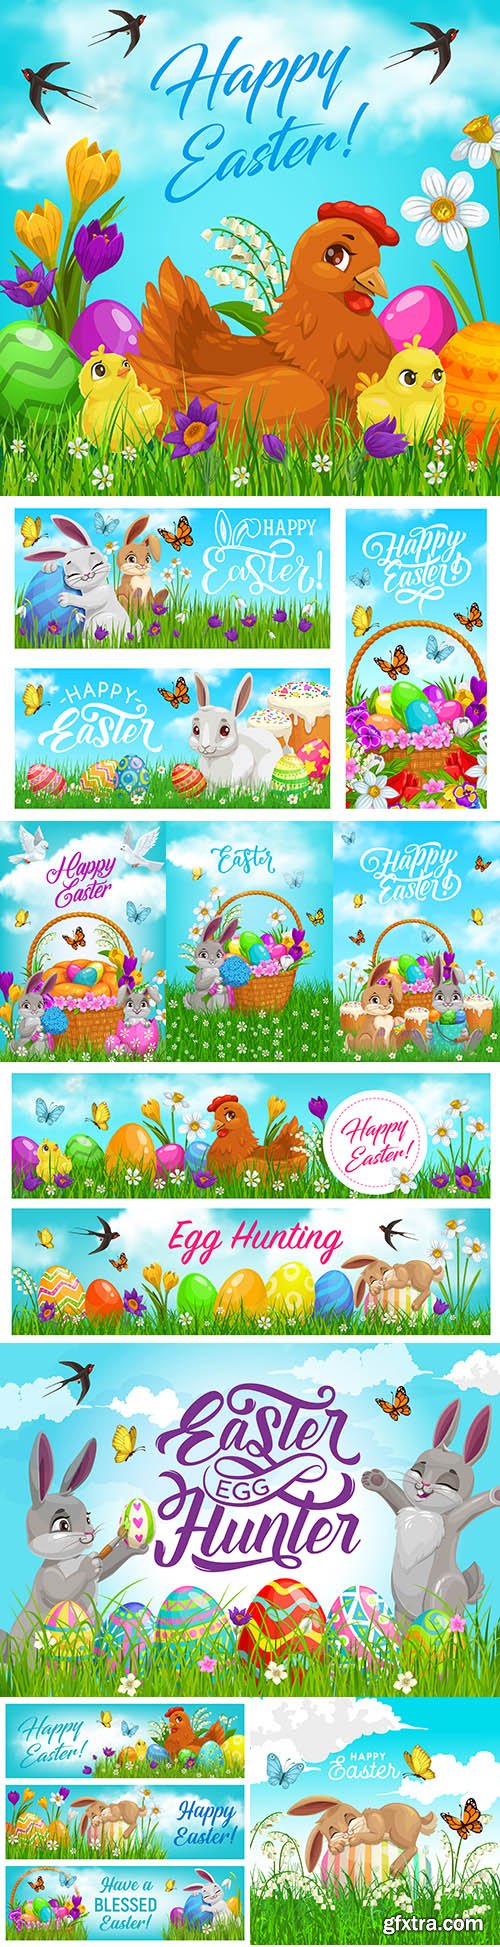 Happy Easter holiday basket for eggs and cartoon rabbits